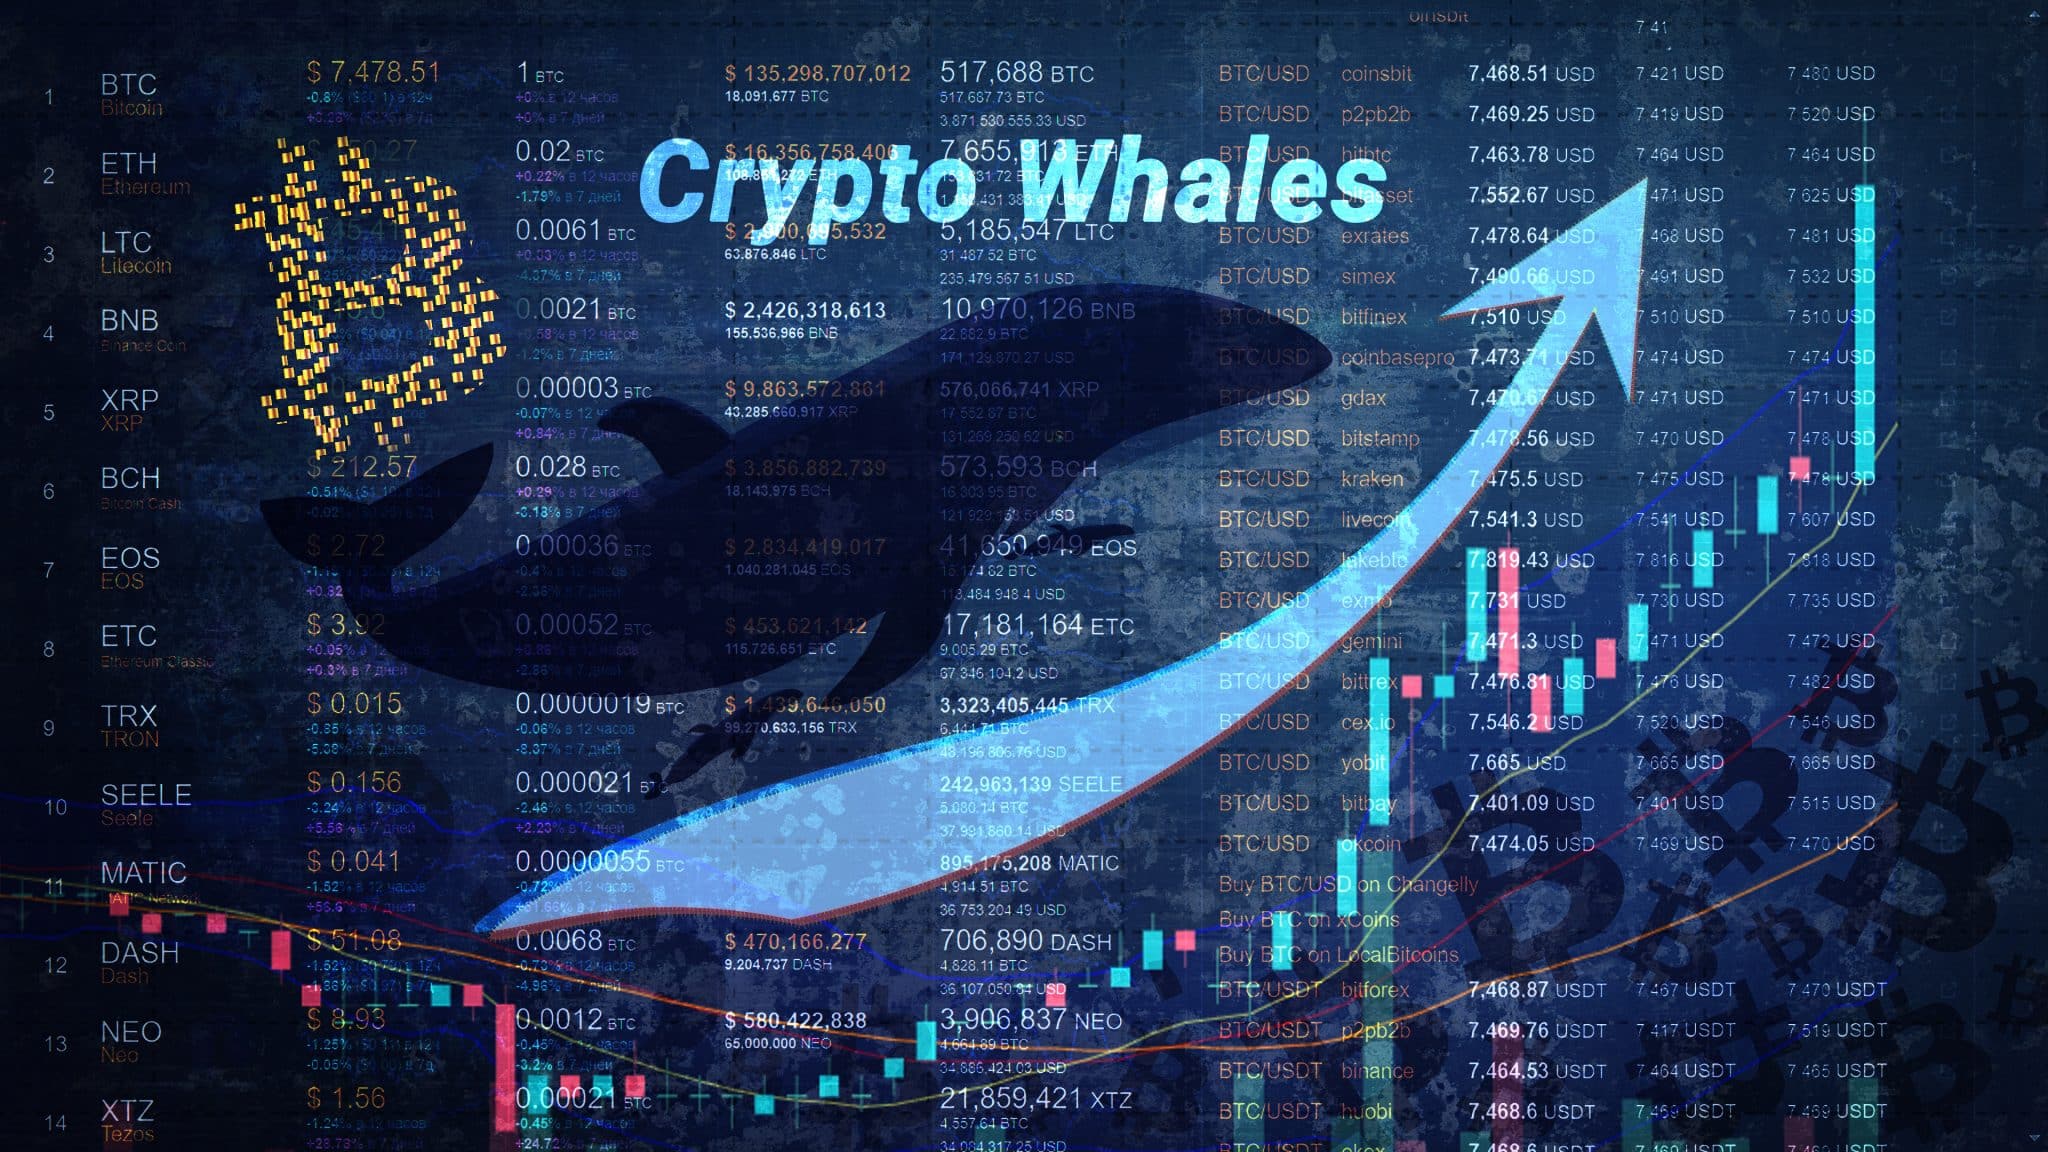 90,000 BTC accumulated by whales in the last 25 days